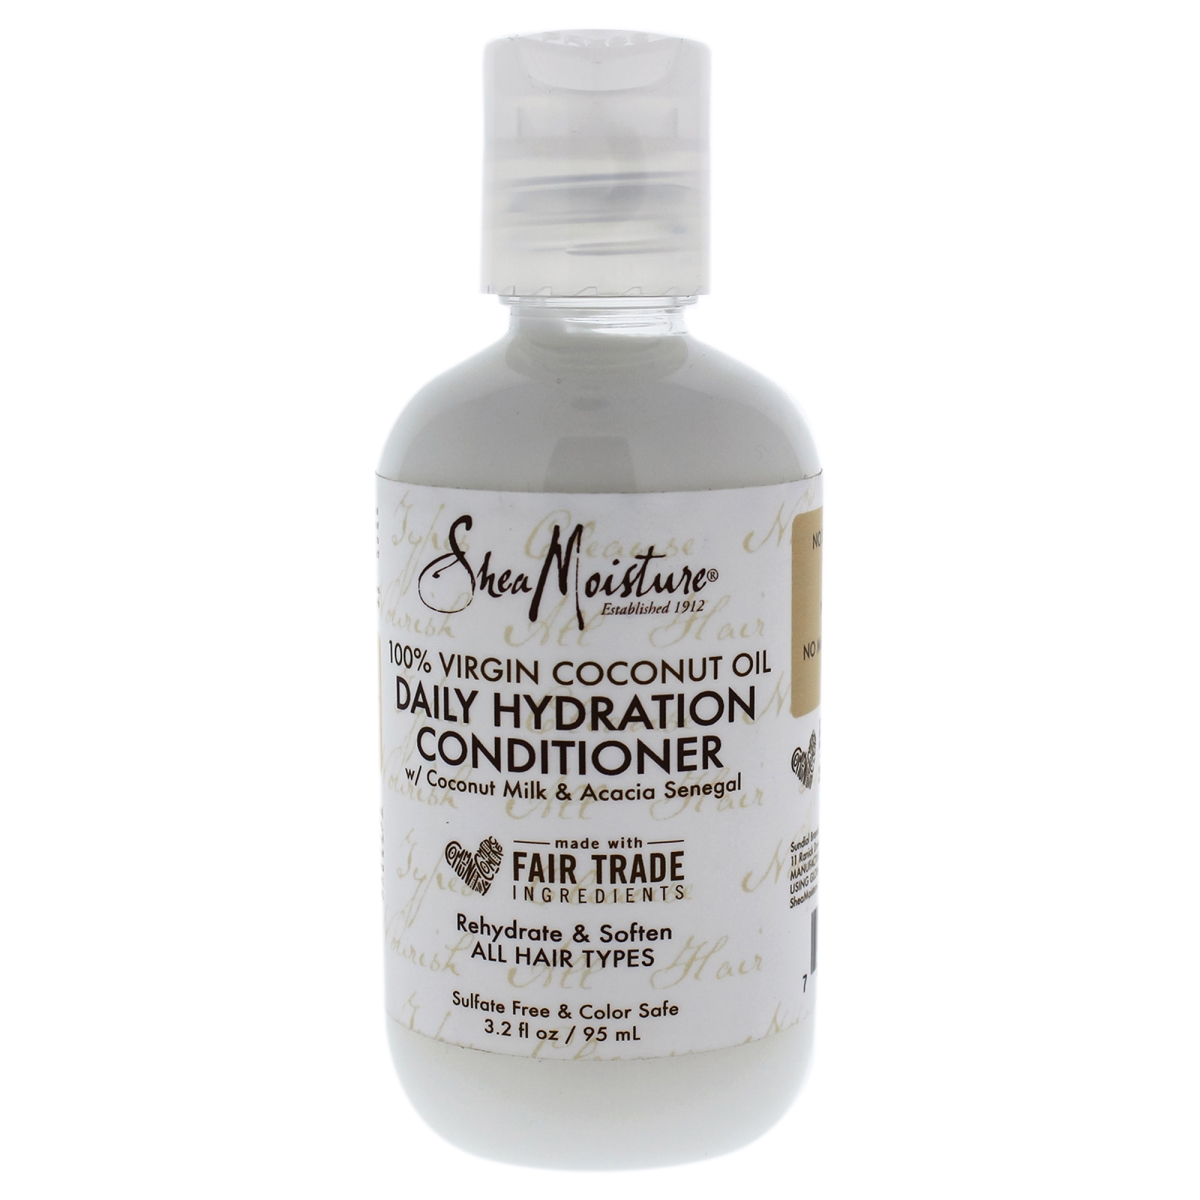 I0087747 100 Percent Virgin Coconut Oil Daily Hydration Conditioner For Unisex - 3.2 Oz